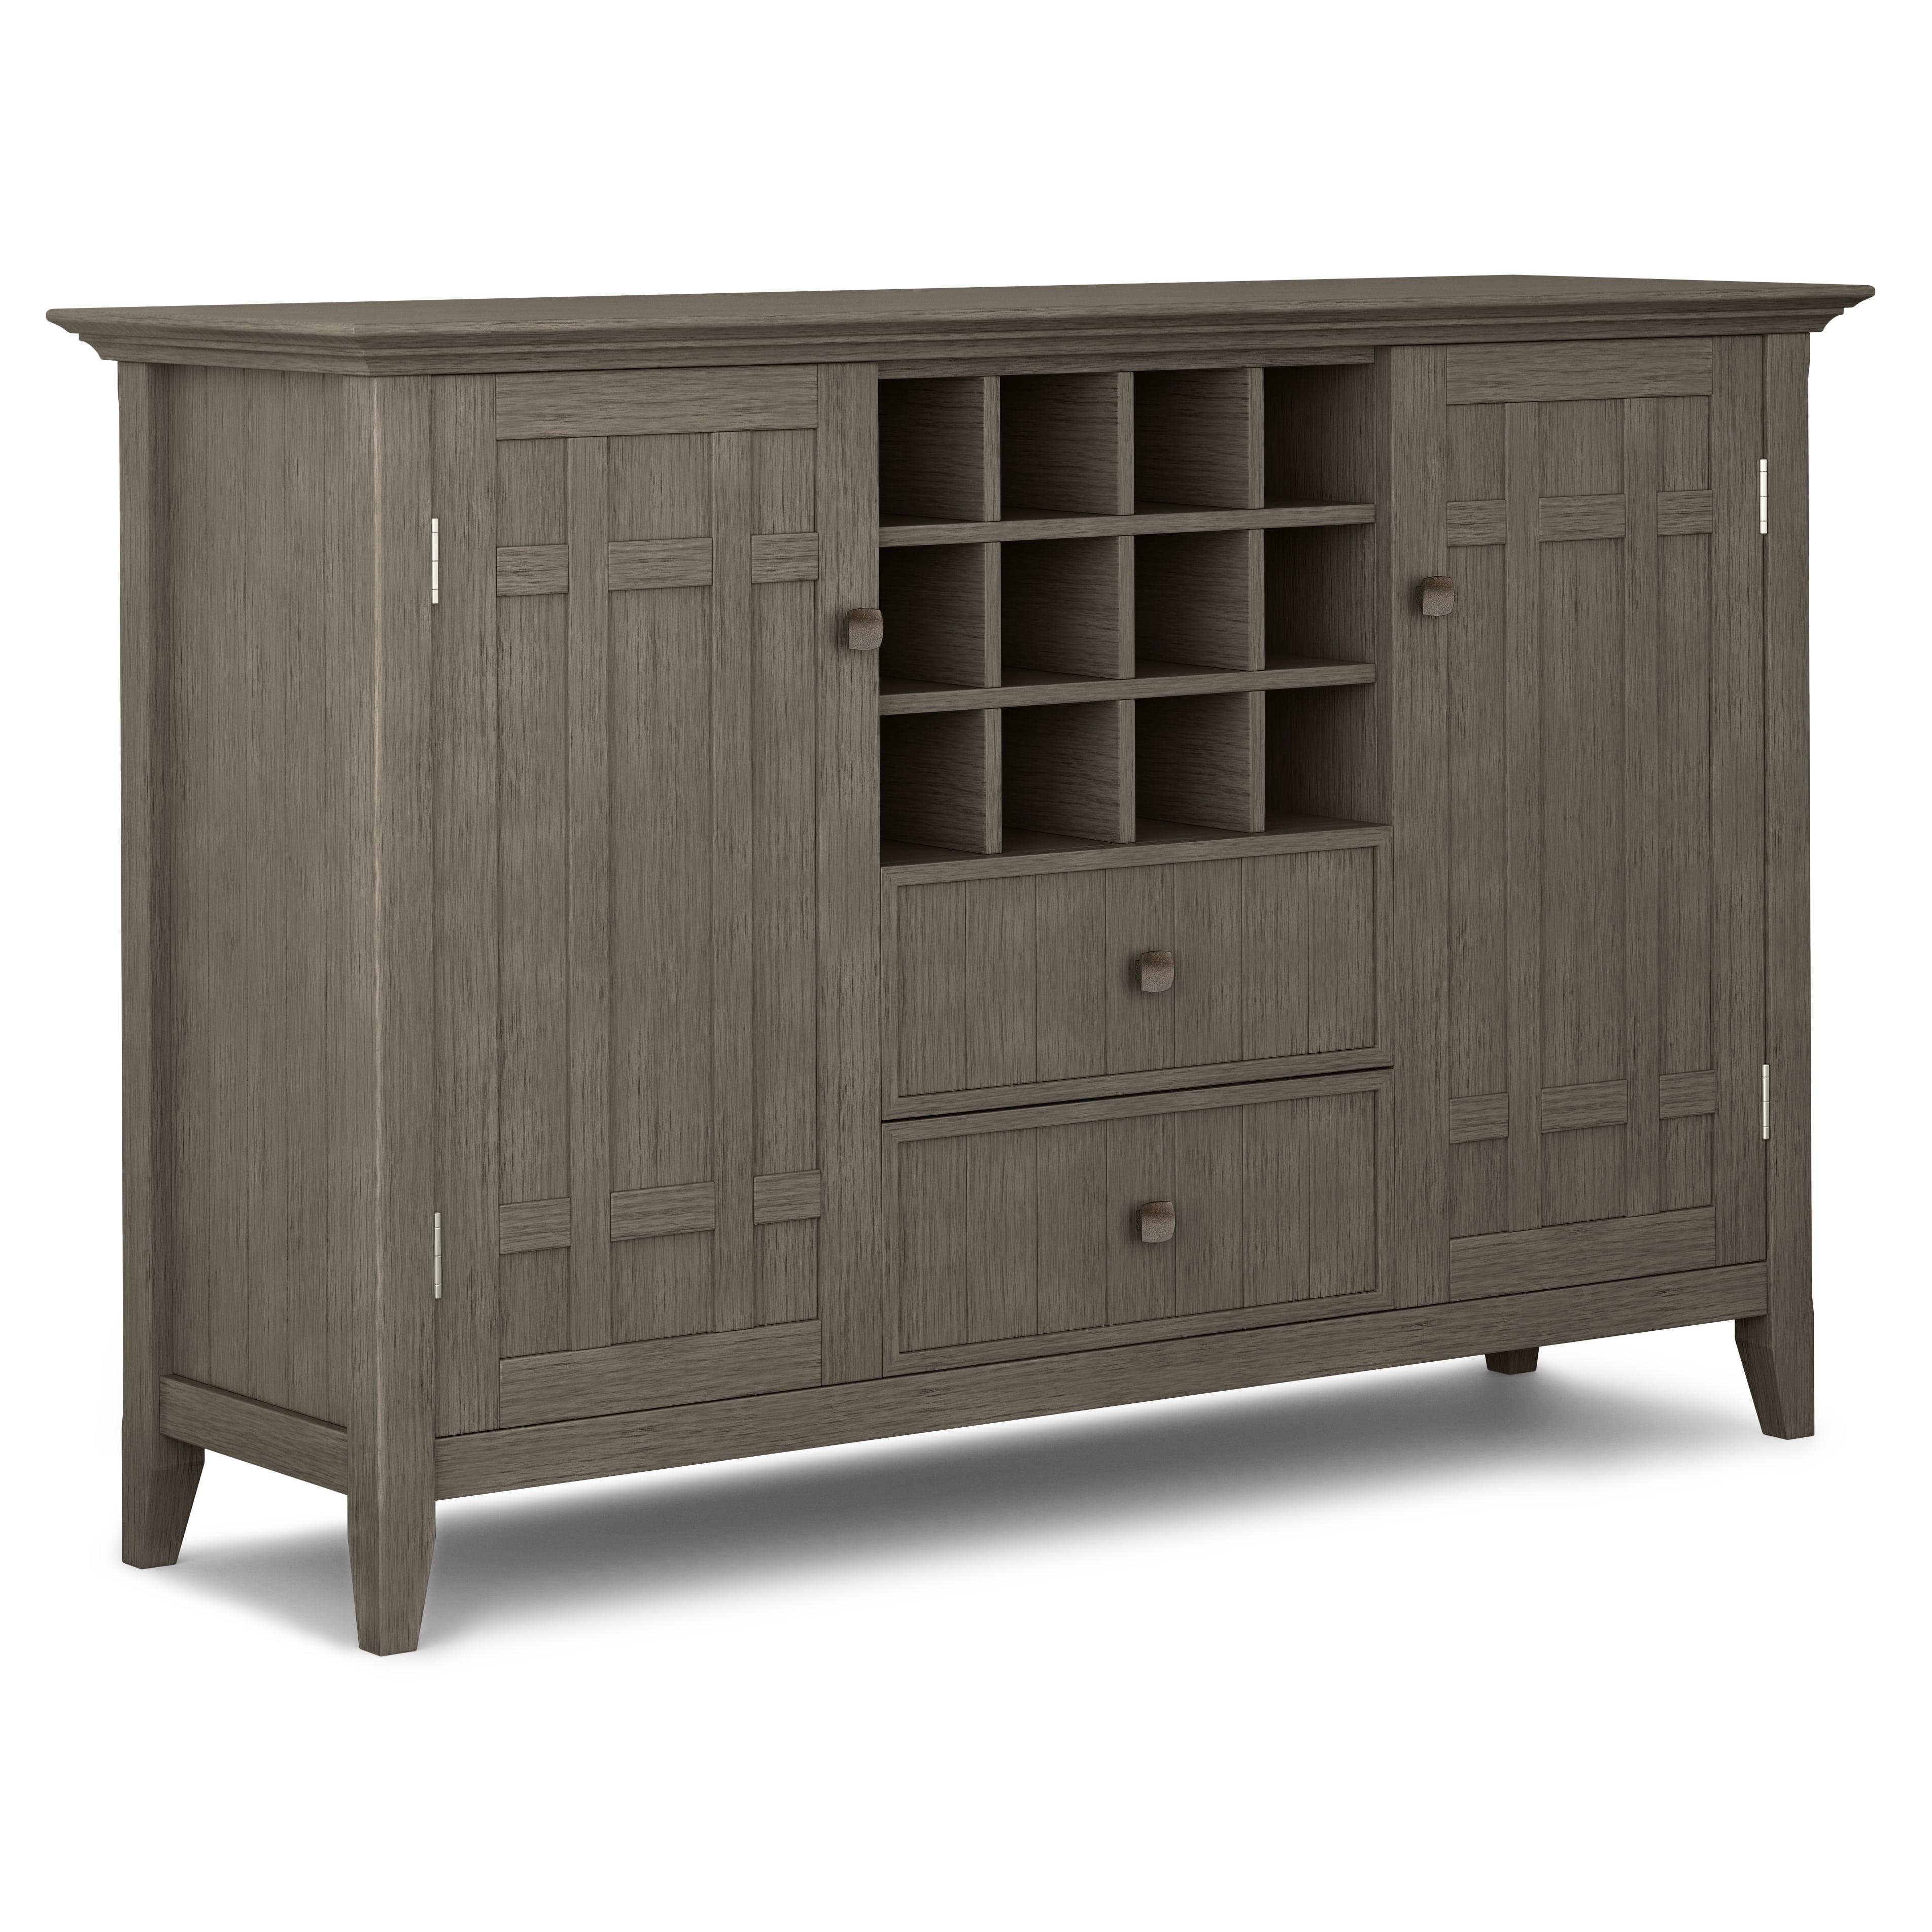 Bedford Solid Wood Farmhouse Grey Sideboard Buffet with Wine Rack